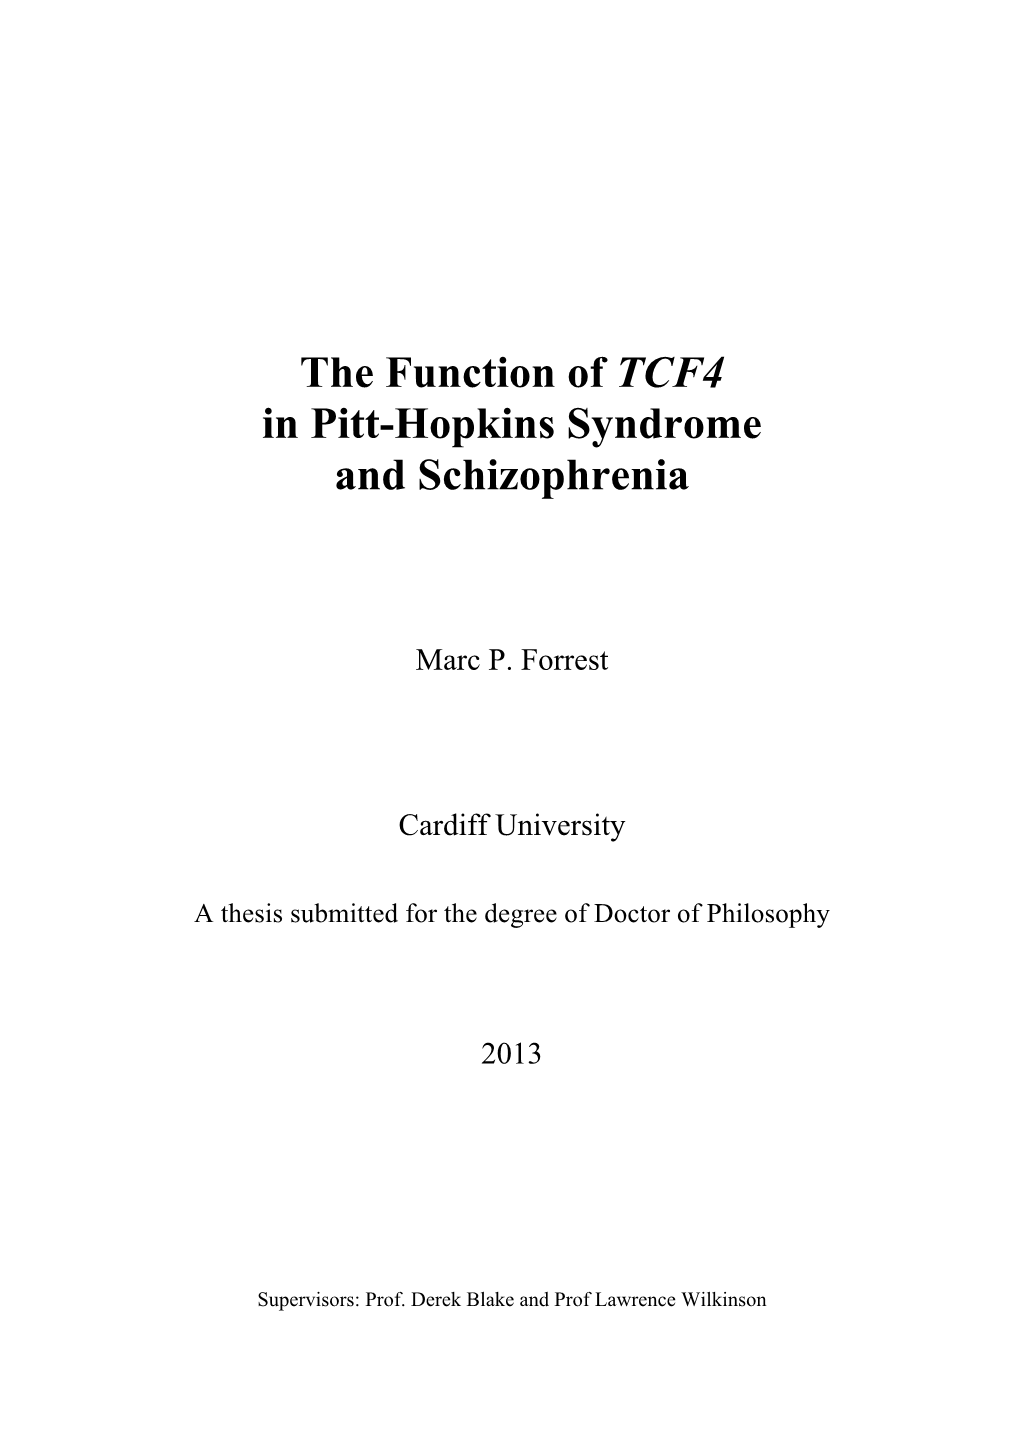 The Function of TCF4 in Pitt-Hopkins Syndrome and Schizophrenia